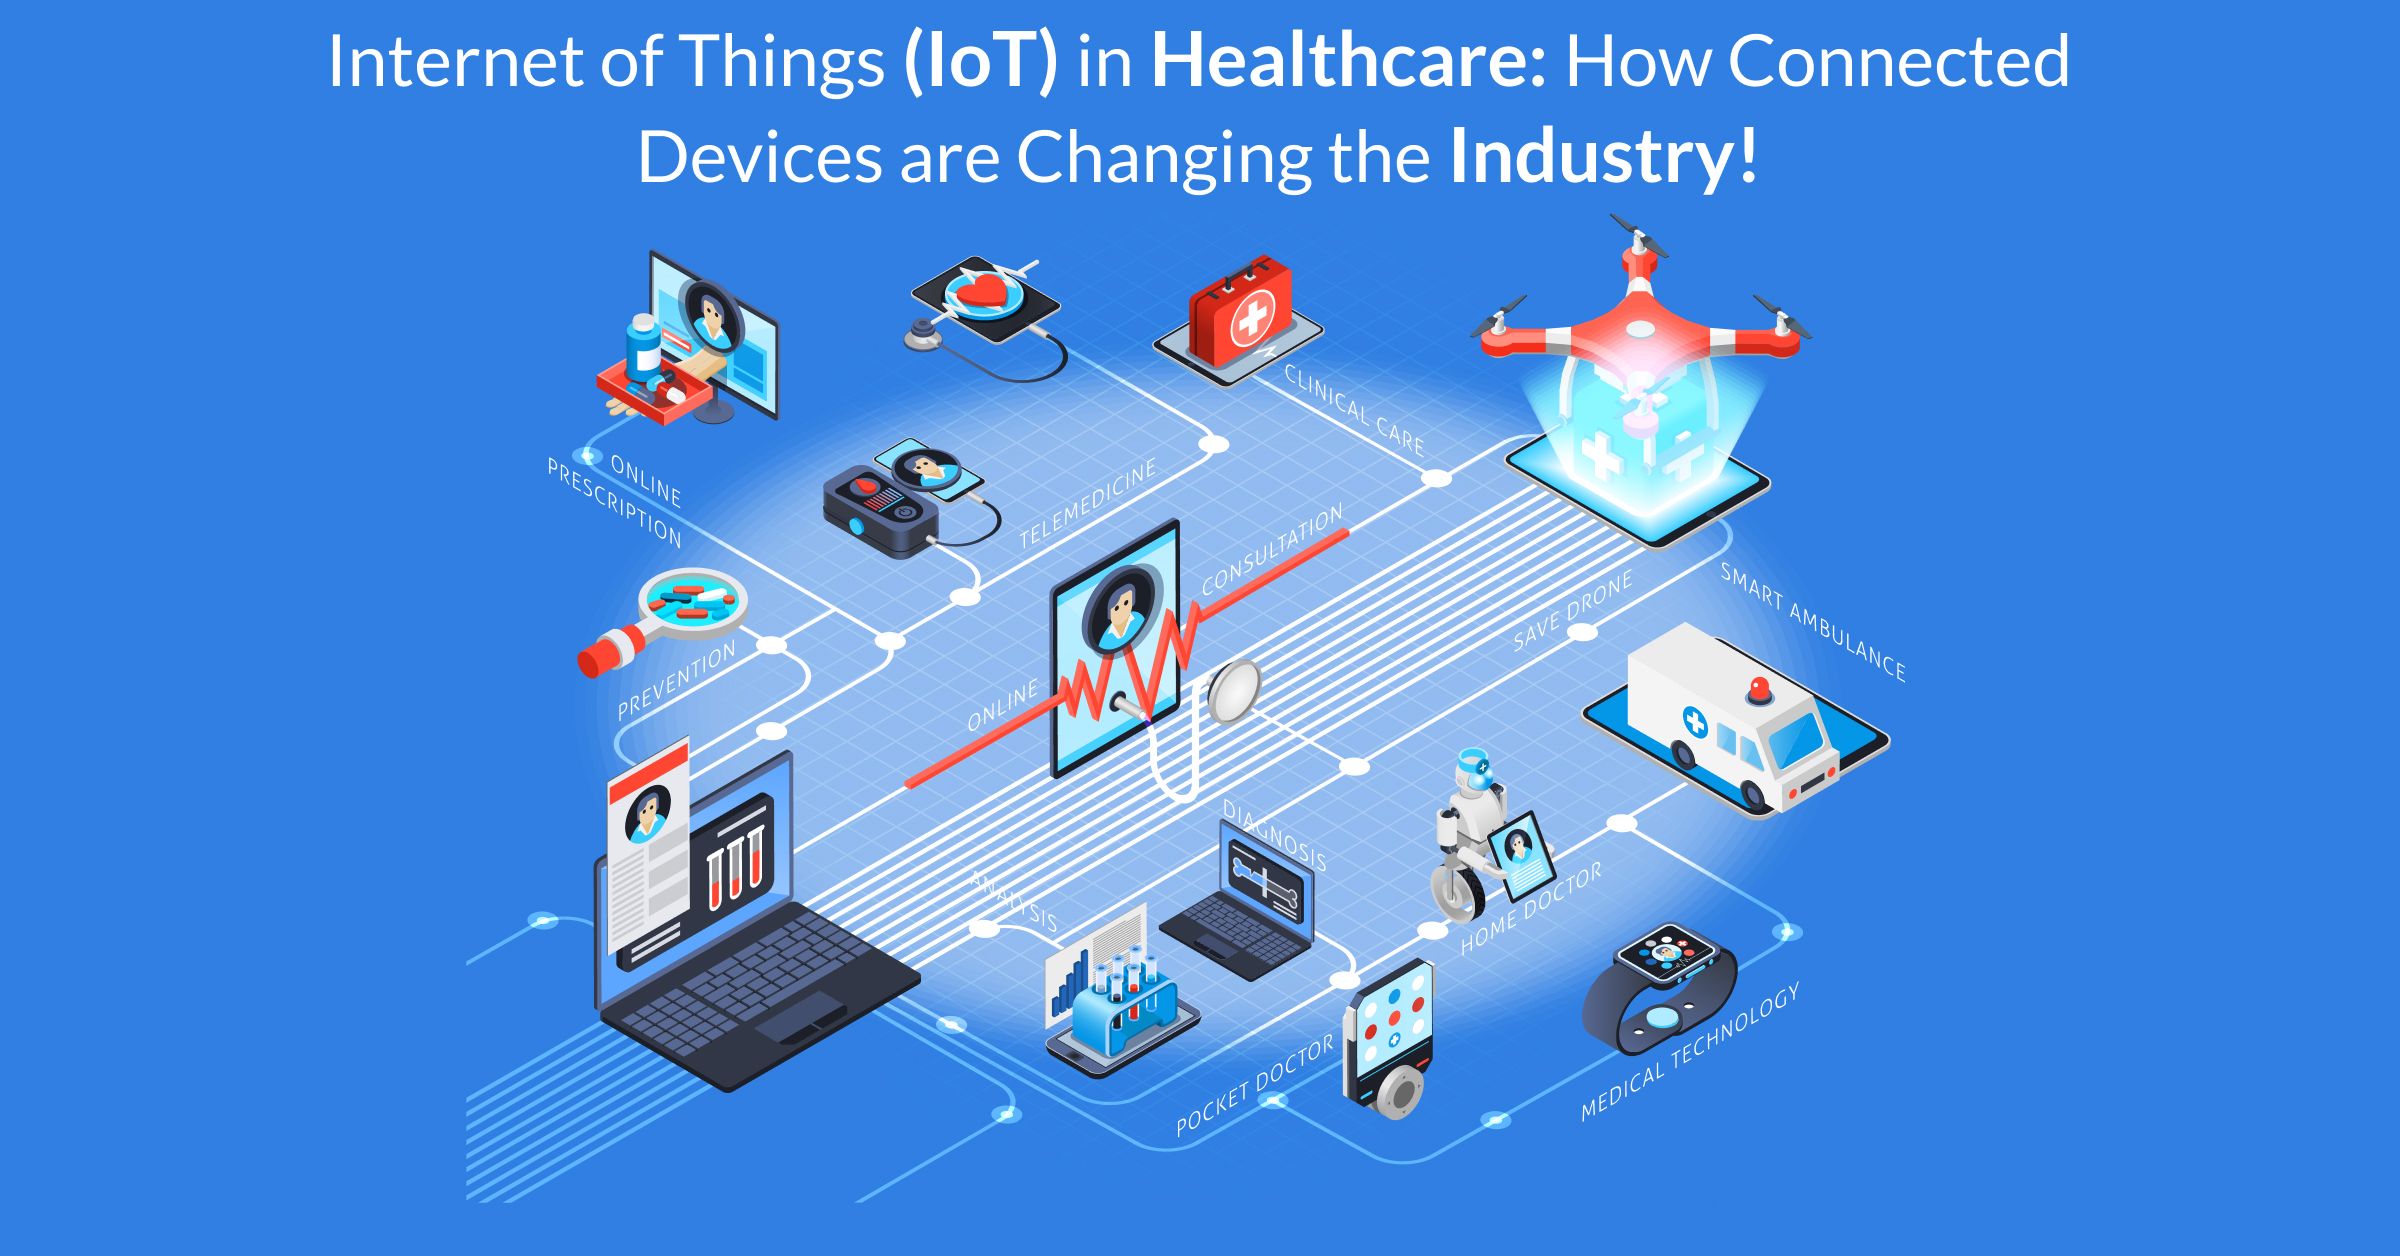 Internet of Things (IoT) in Healthcare: How Connected Devices are Changing the Industry!